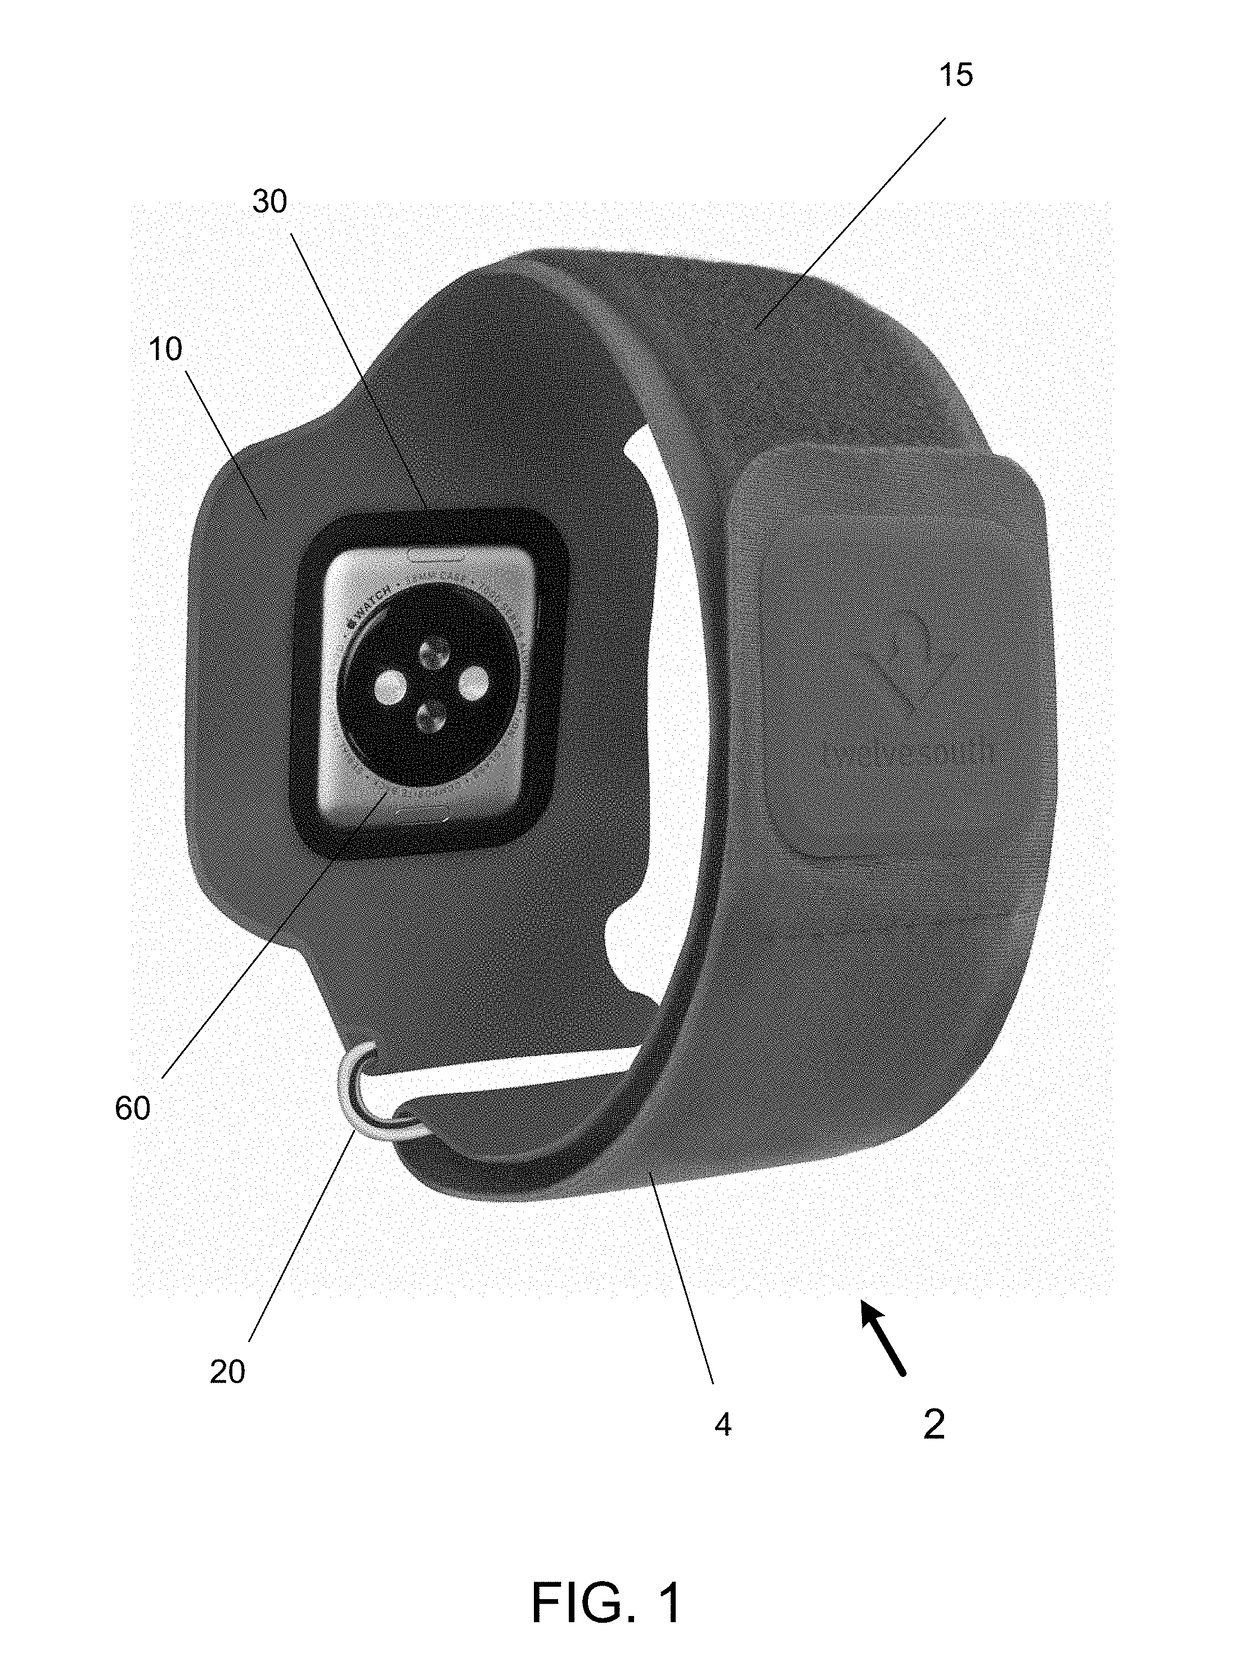 Wearable holder for securing a smart watch